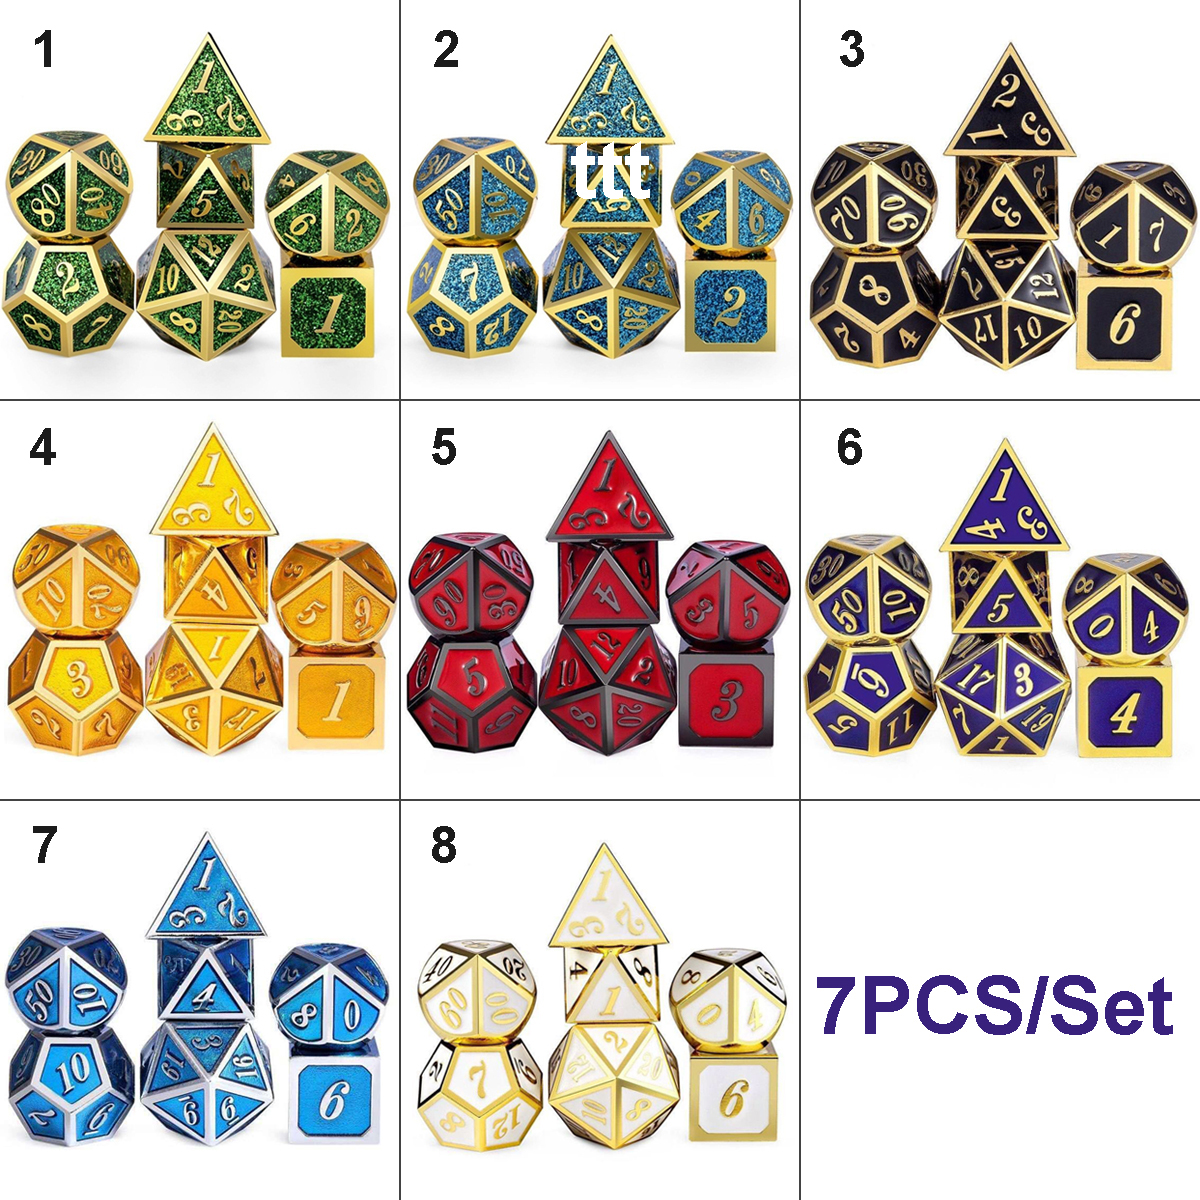 7-PcsSet-Metal-Dice-Set-Role-Playing-Dragons-Table-Board-Game-Toys-With-Cloth-Bag-Bar-Party-Game-Dic-1672532-2